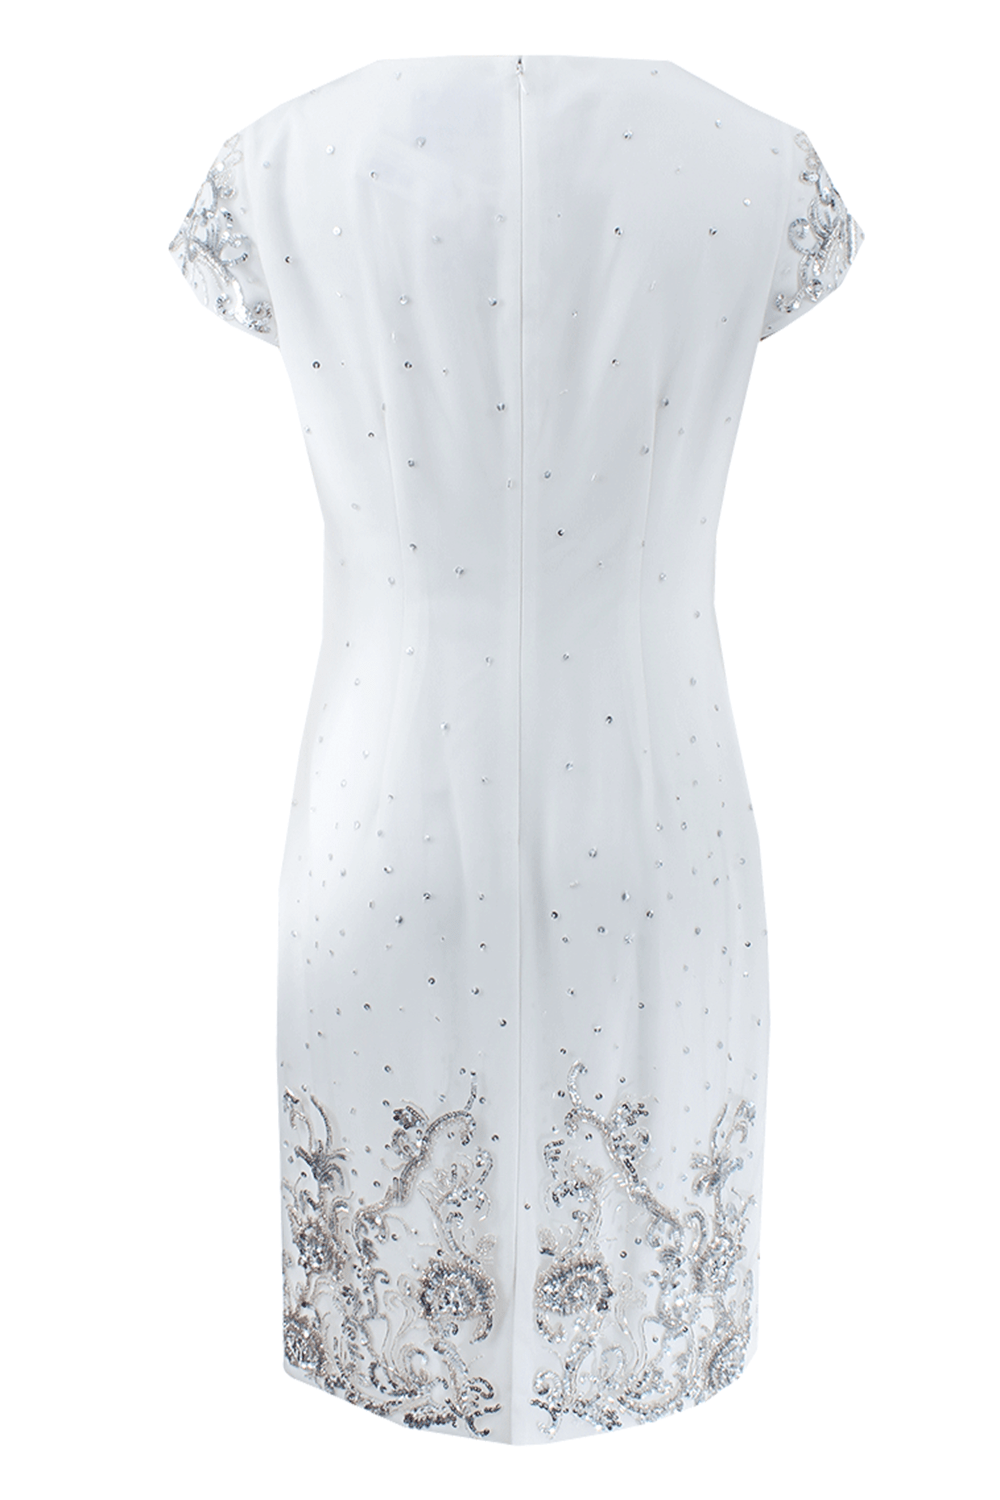 Beaded Shift Cocktail Dress CLOTHINGDRESSCASUAL MARCHESA NOTTE   